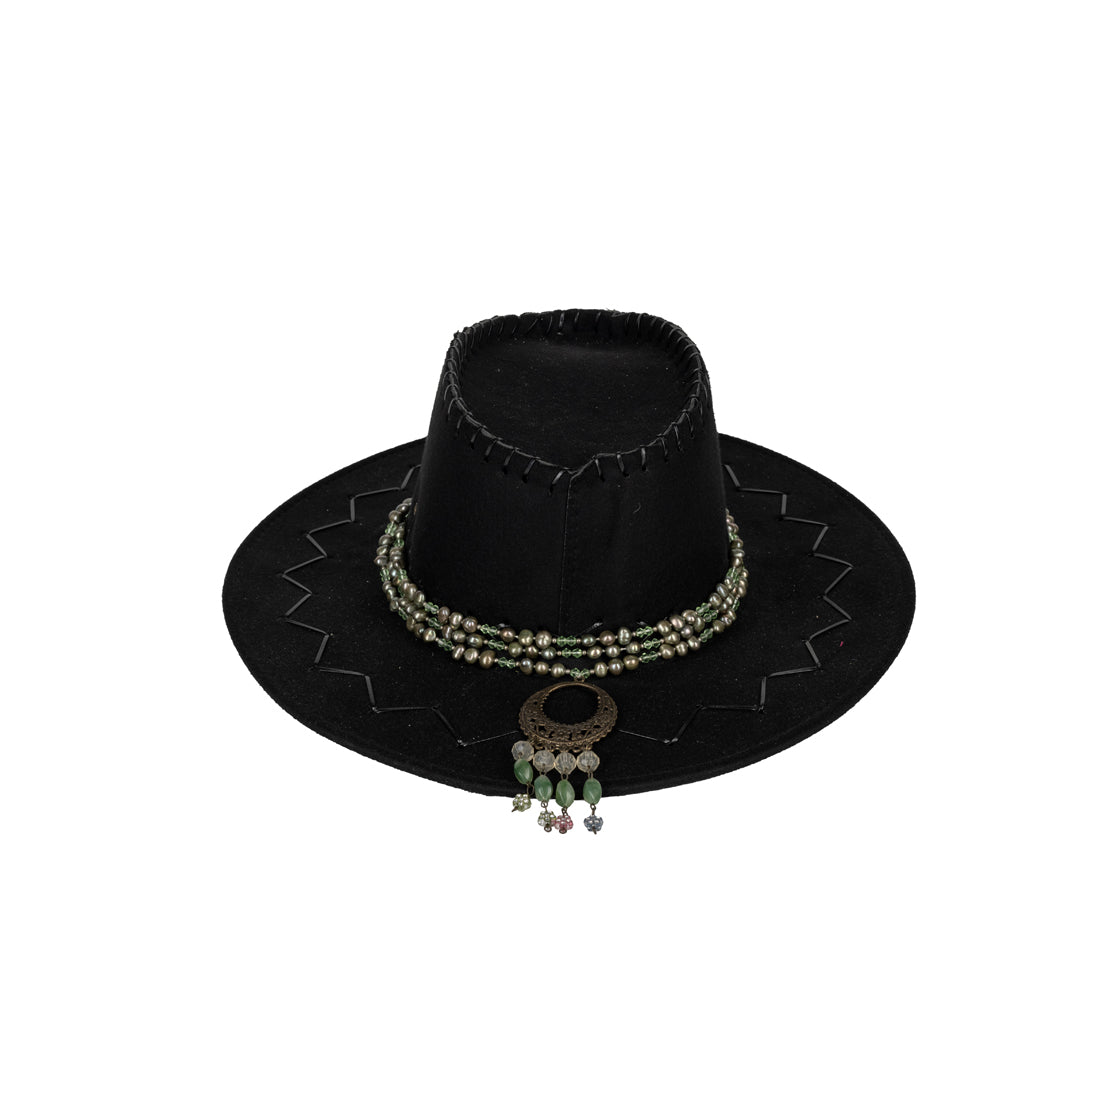 Black Cowboy Brand New Hat with Accessories